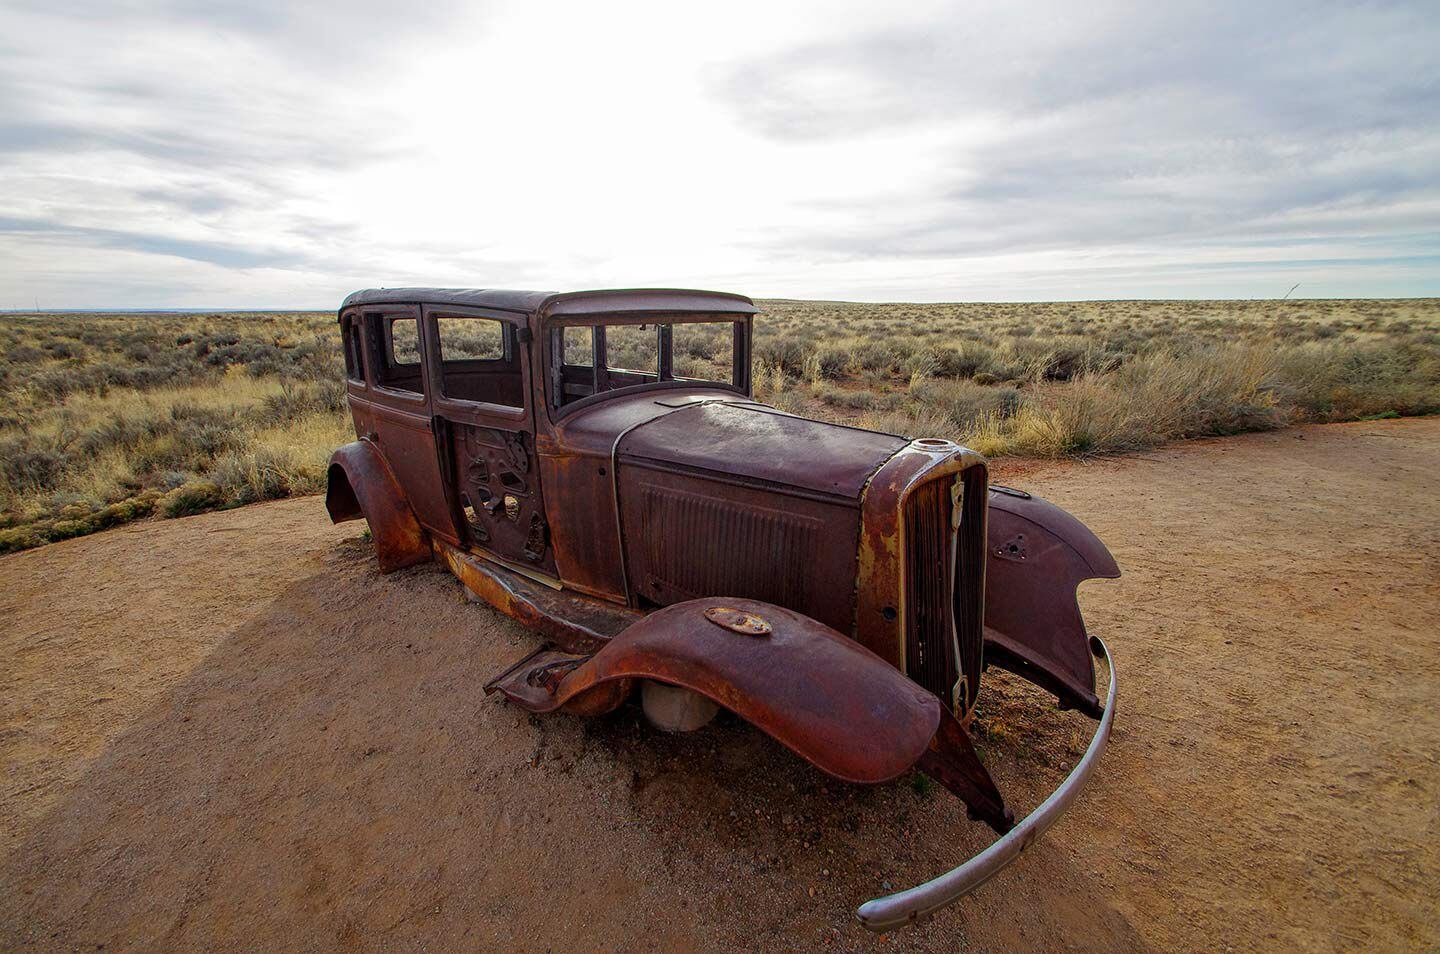 A Studebaker stands sentinel over the site where Route 66 crossed the Petrified Forest N.P. in Arizona.